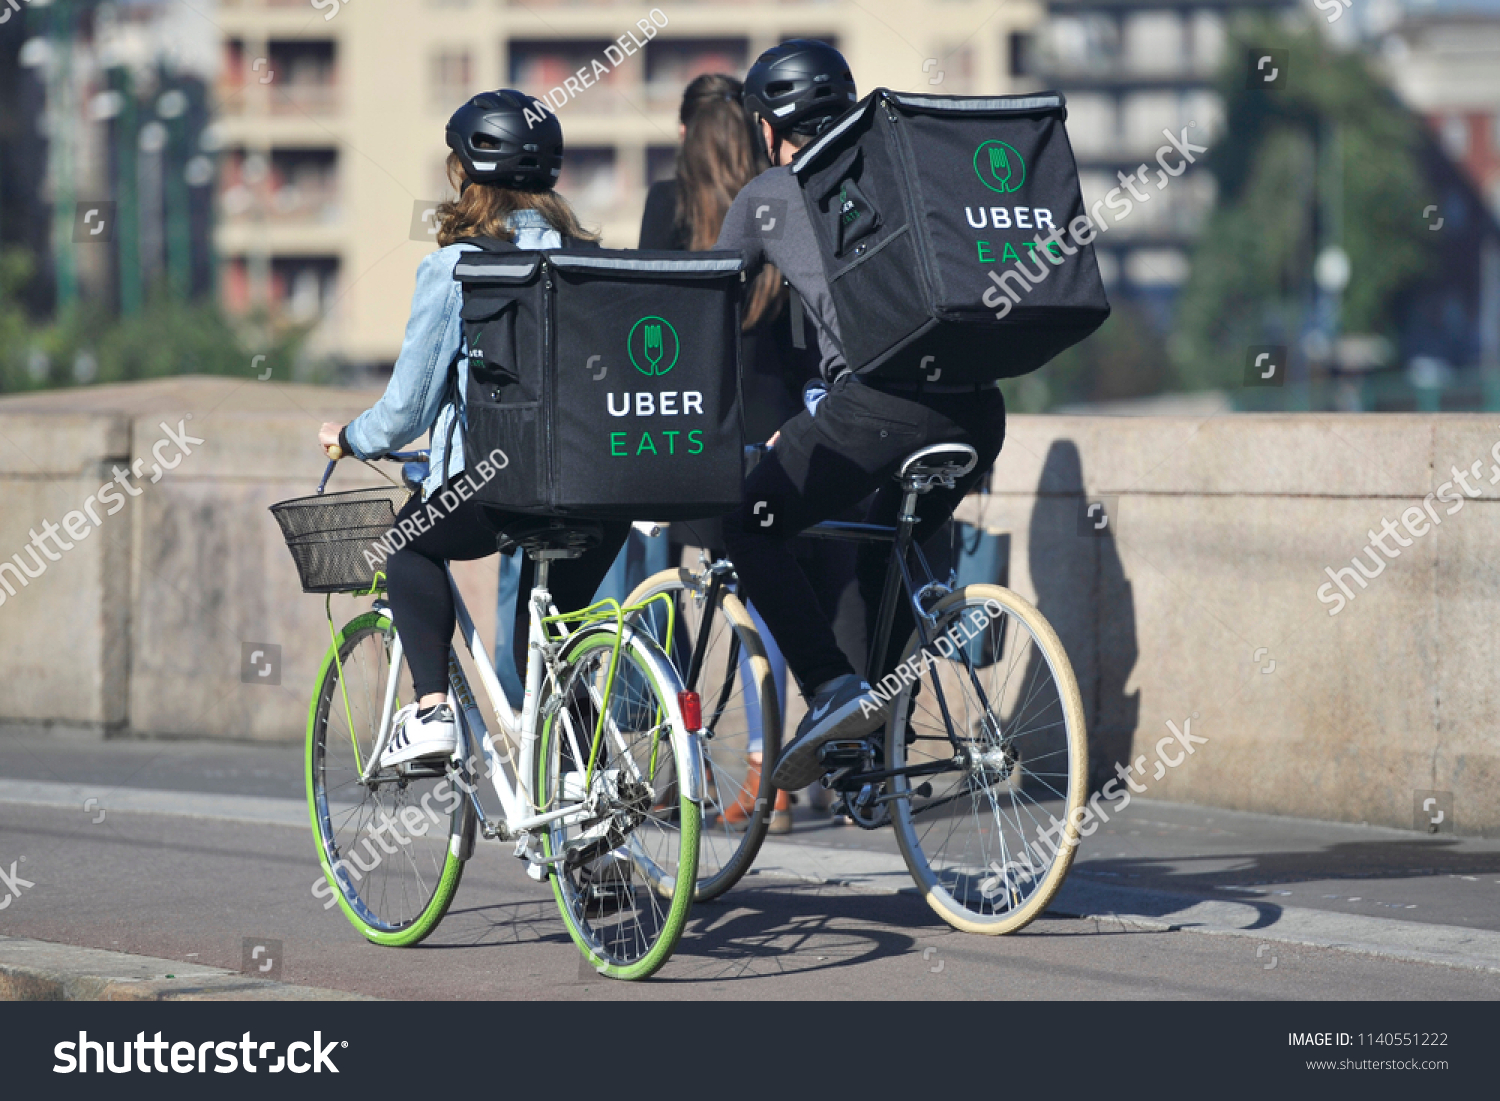 register for uber eats bicycle